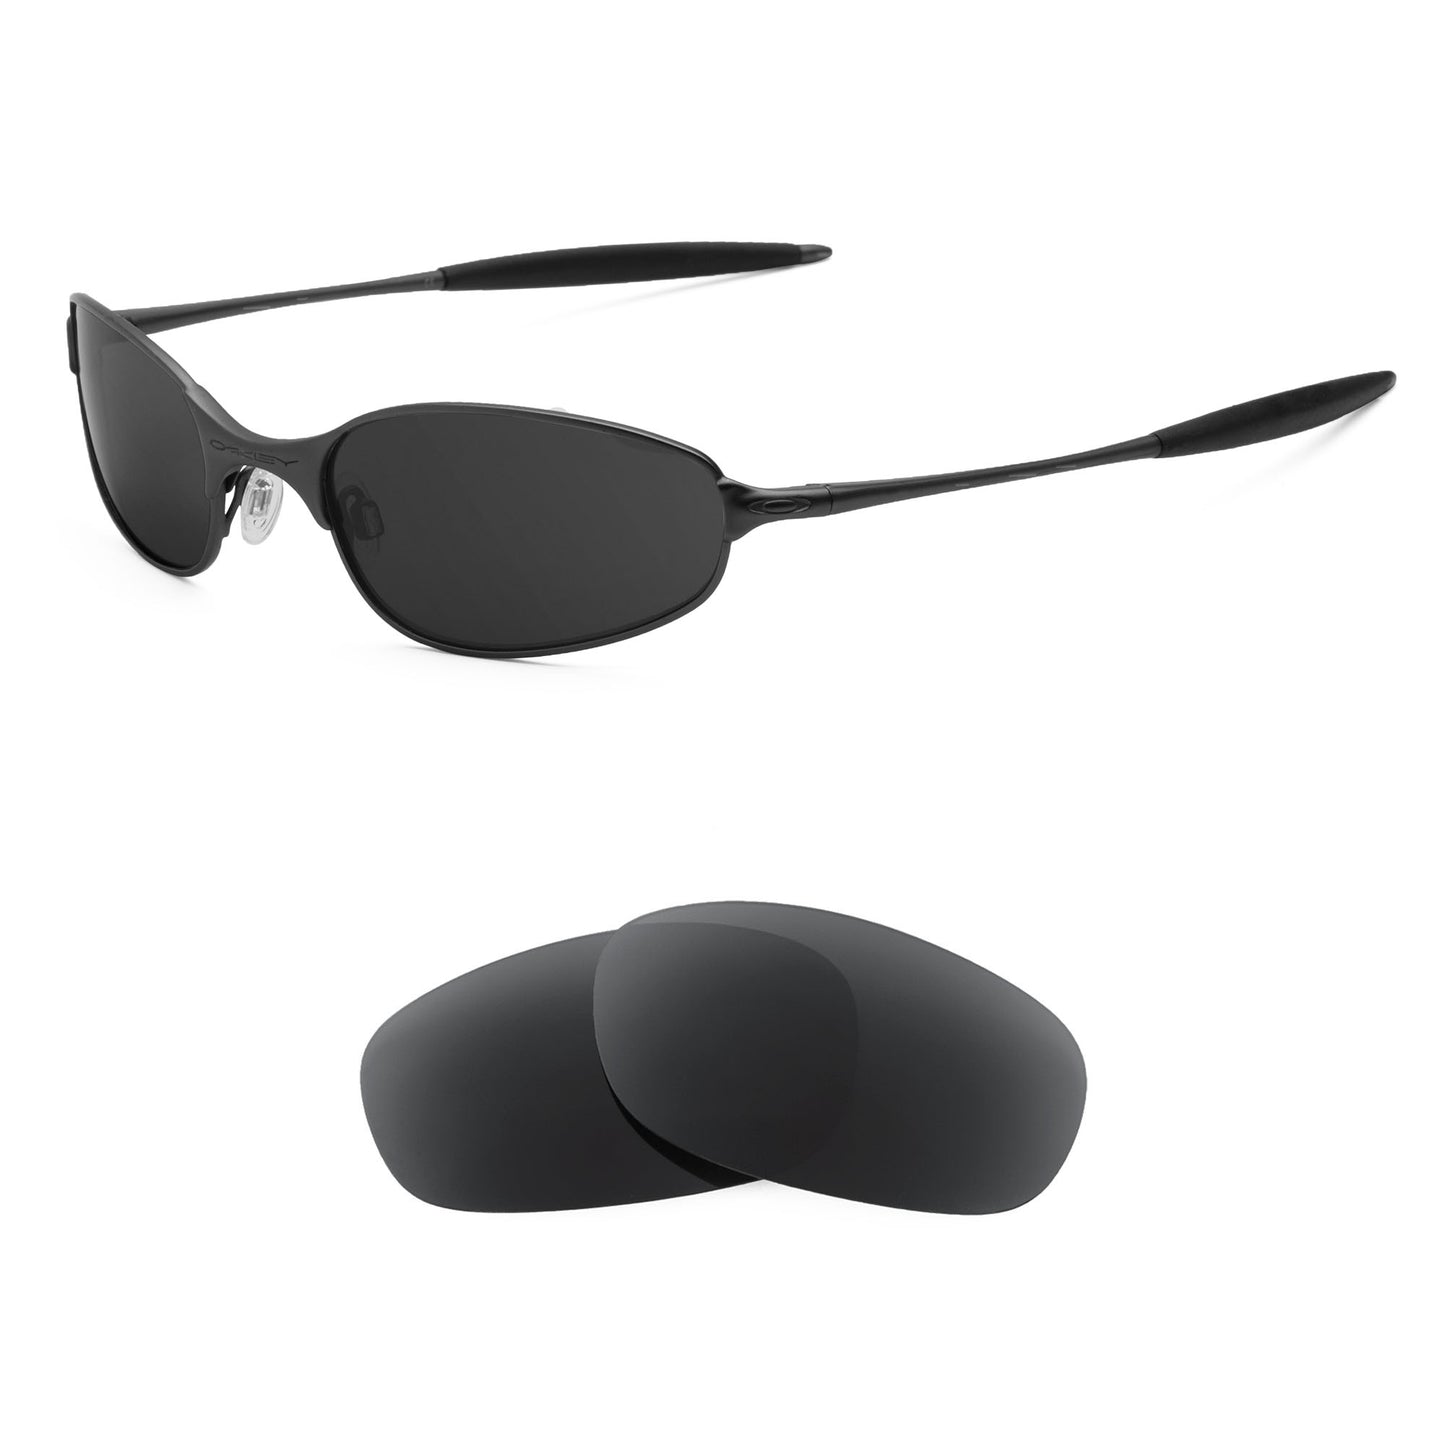 Oakley A Wire 2.0 Spring Hinge sunglasses with replacement lenses